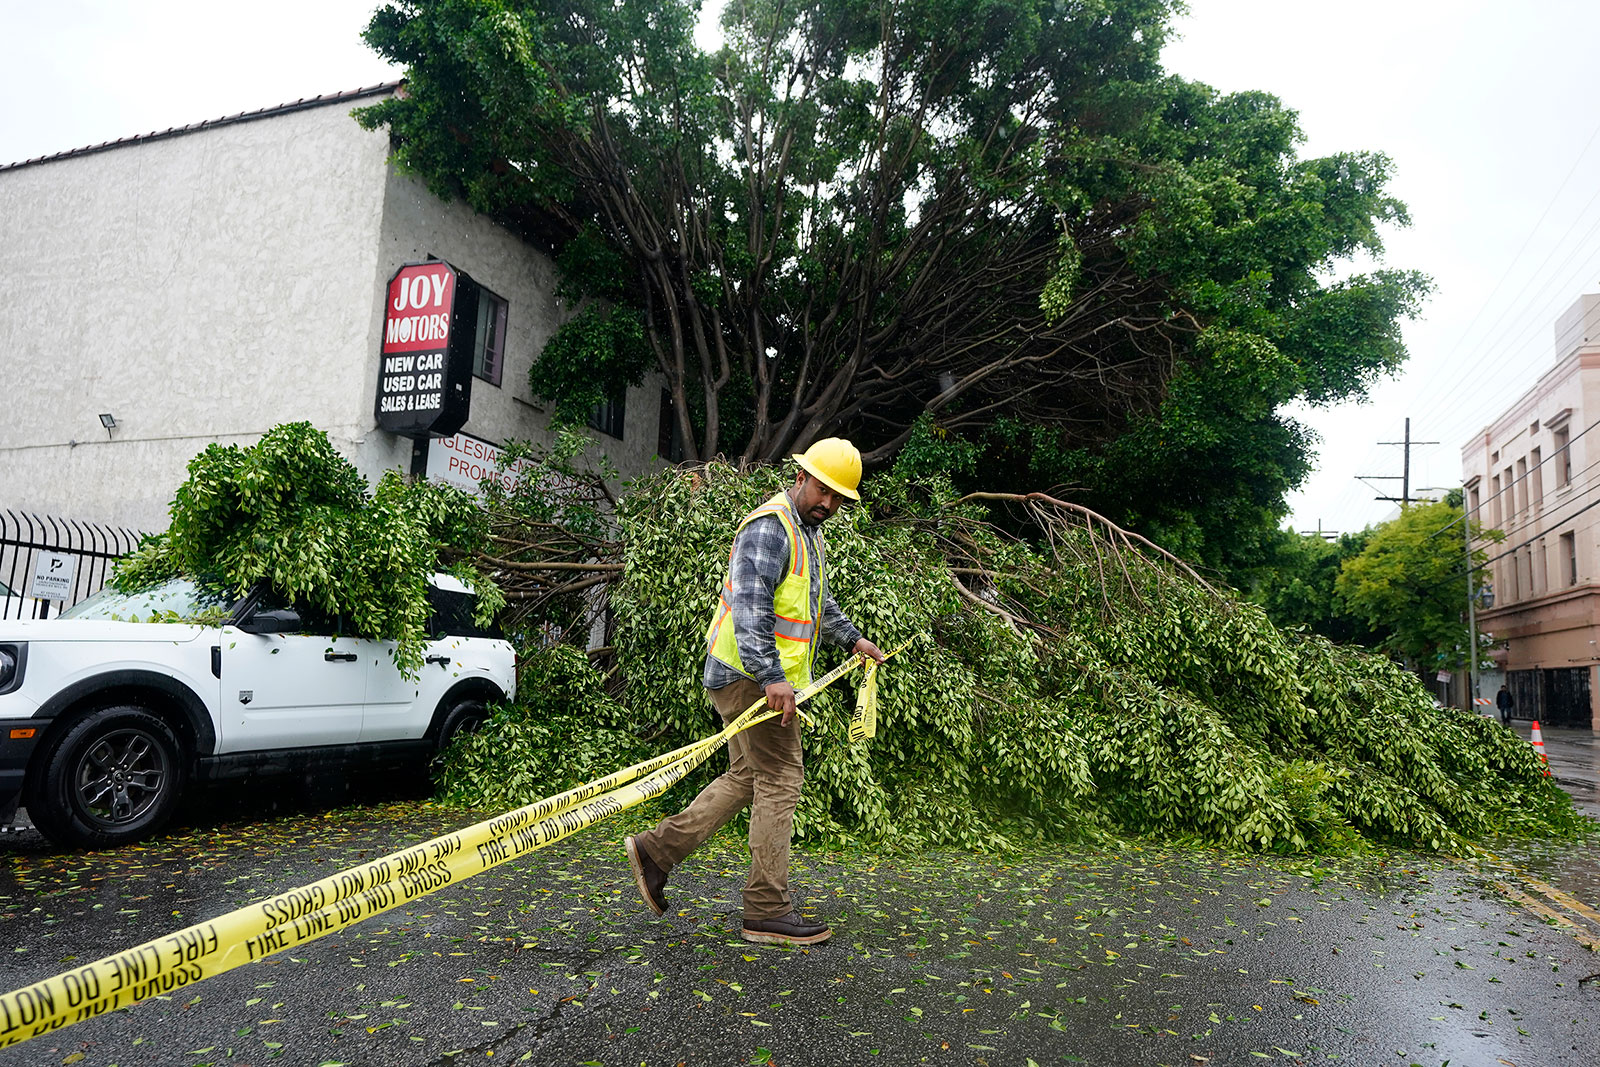 A worker drags caution tape to block off a road after a tree fell in Los Angeles on August 20.